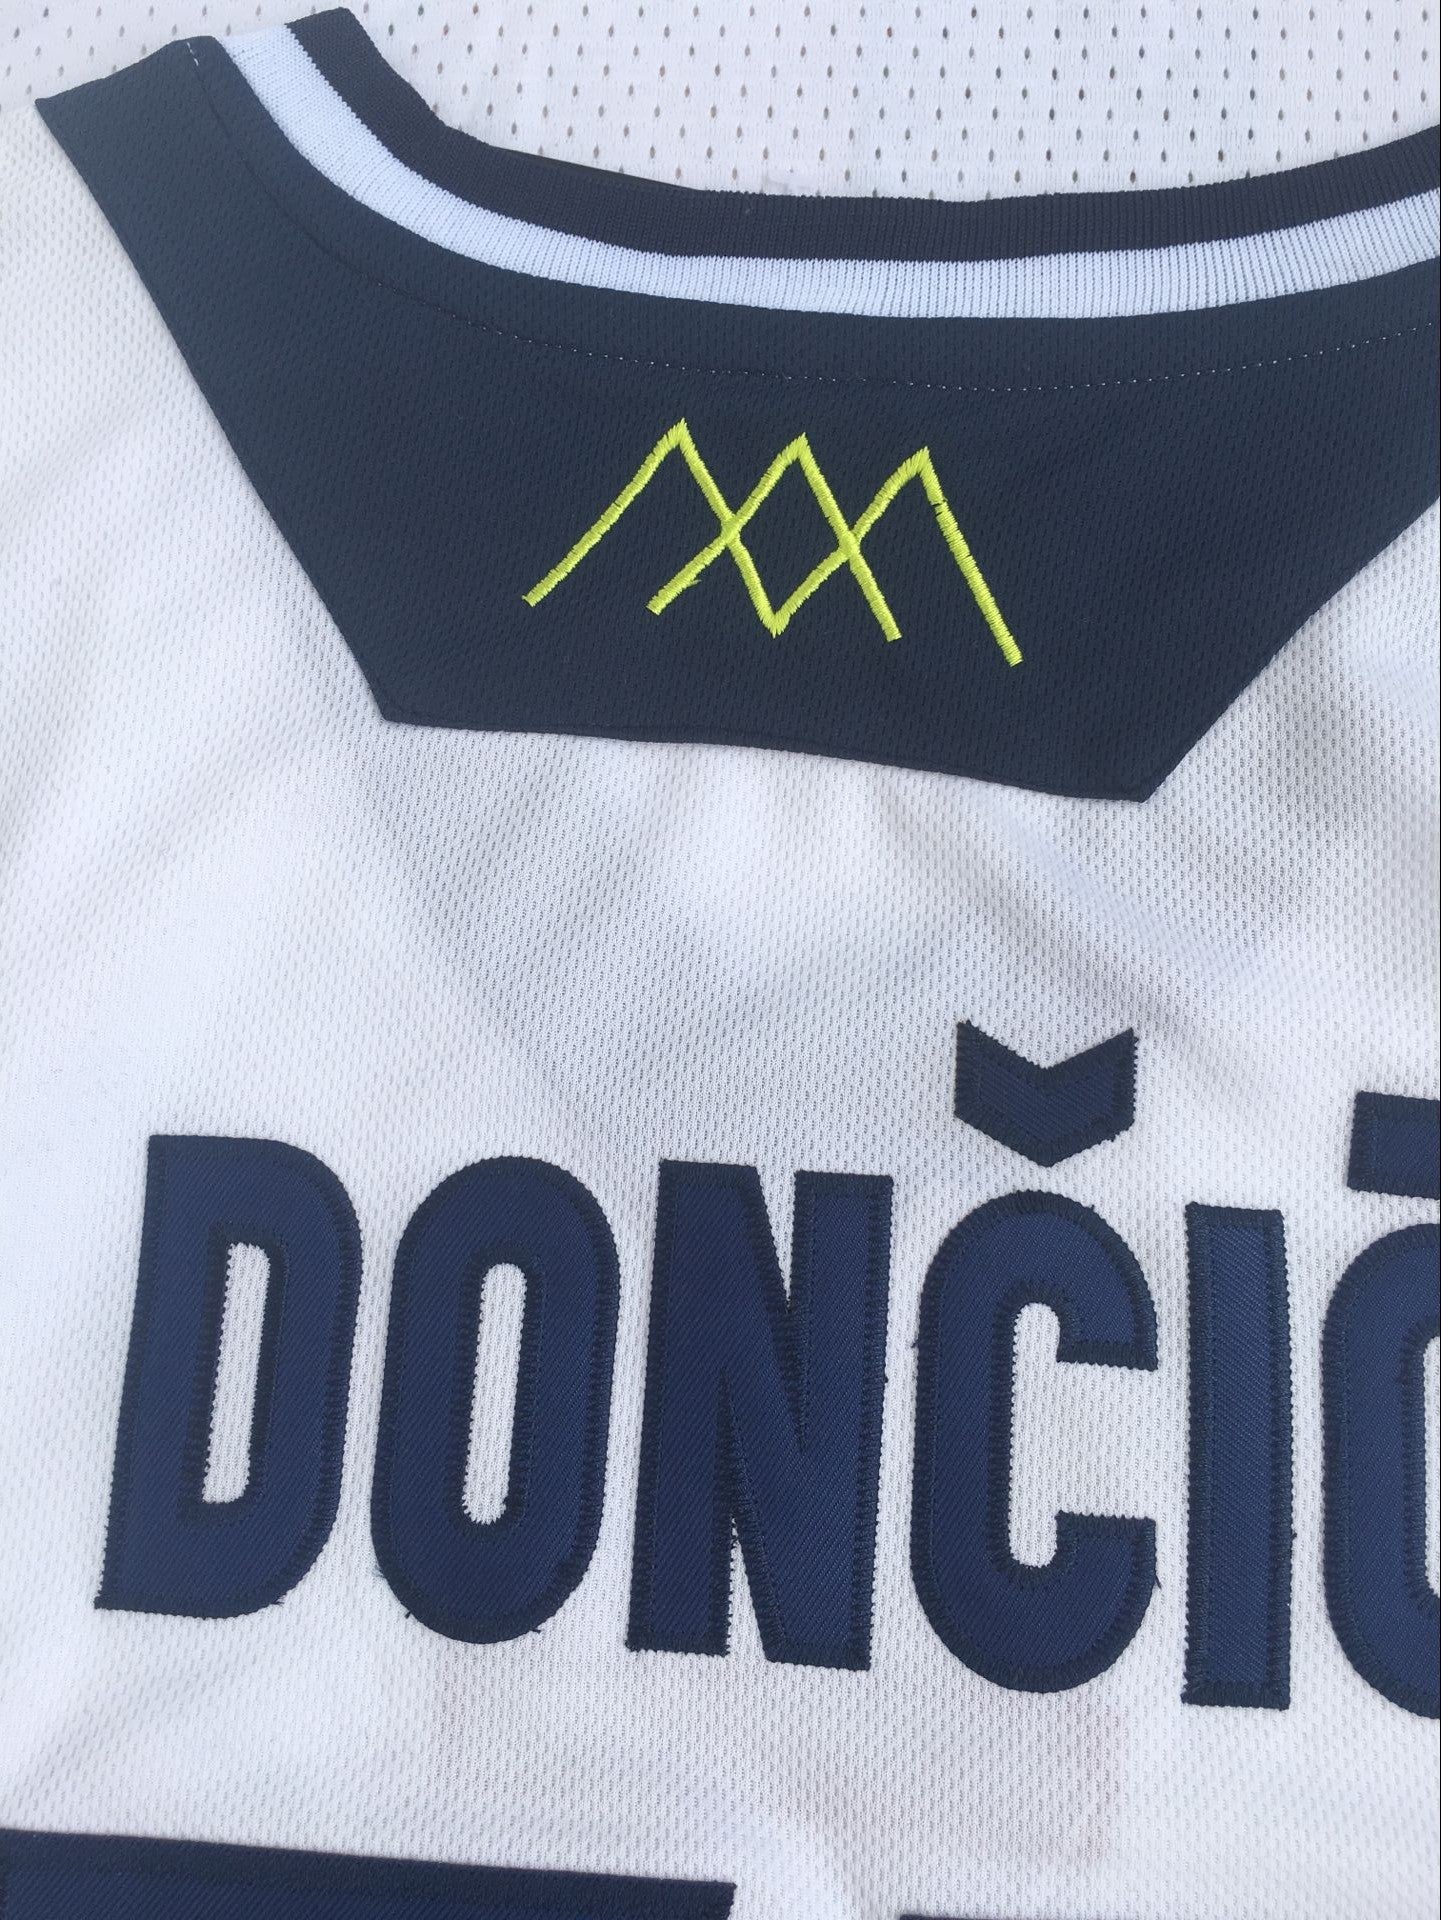 Euroleague national team No. 77 Luka Doncic white embroidered jersey